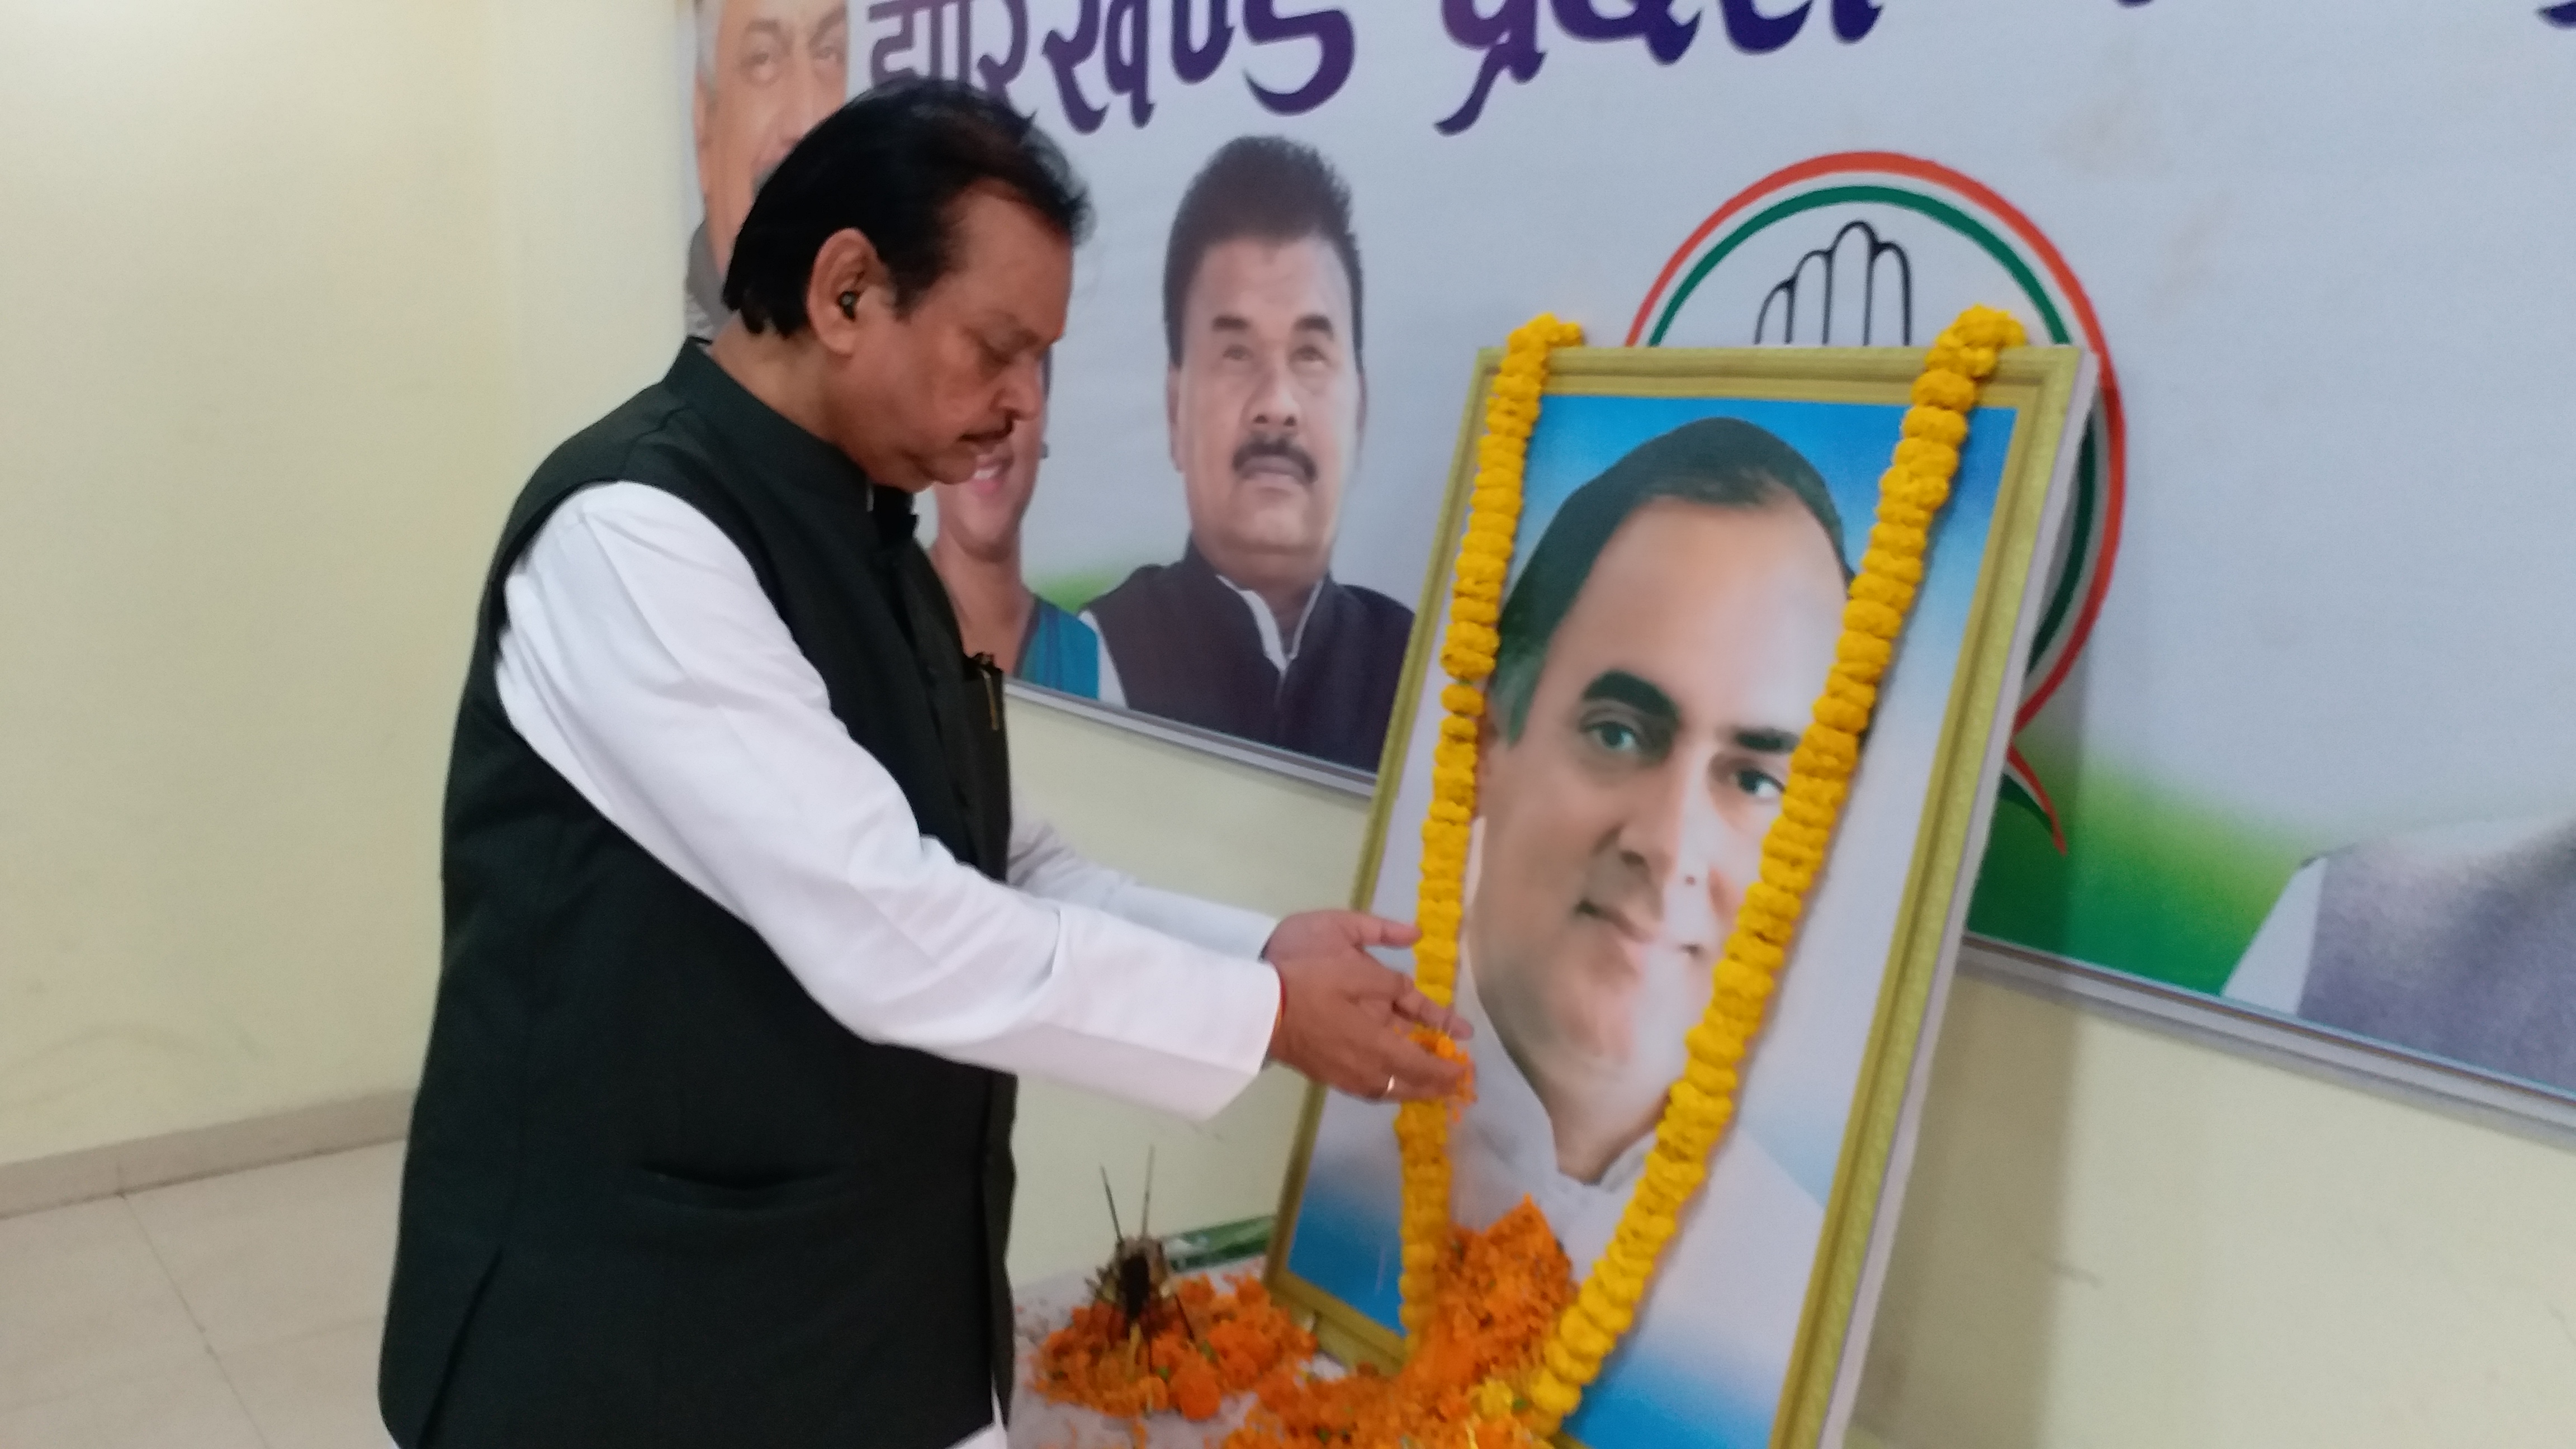 Jharkhand Congress pays tribute to former Prime Minister Rajiv Gandhi on his death anniversary in Ranchi